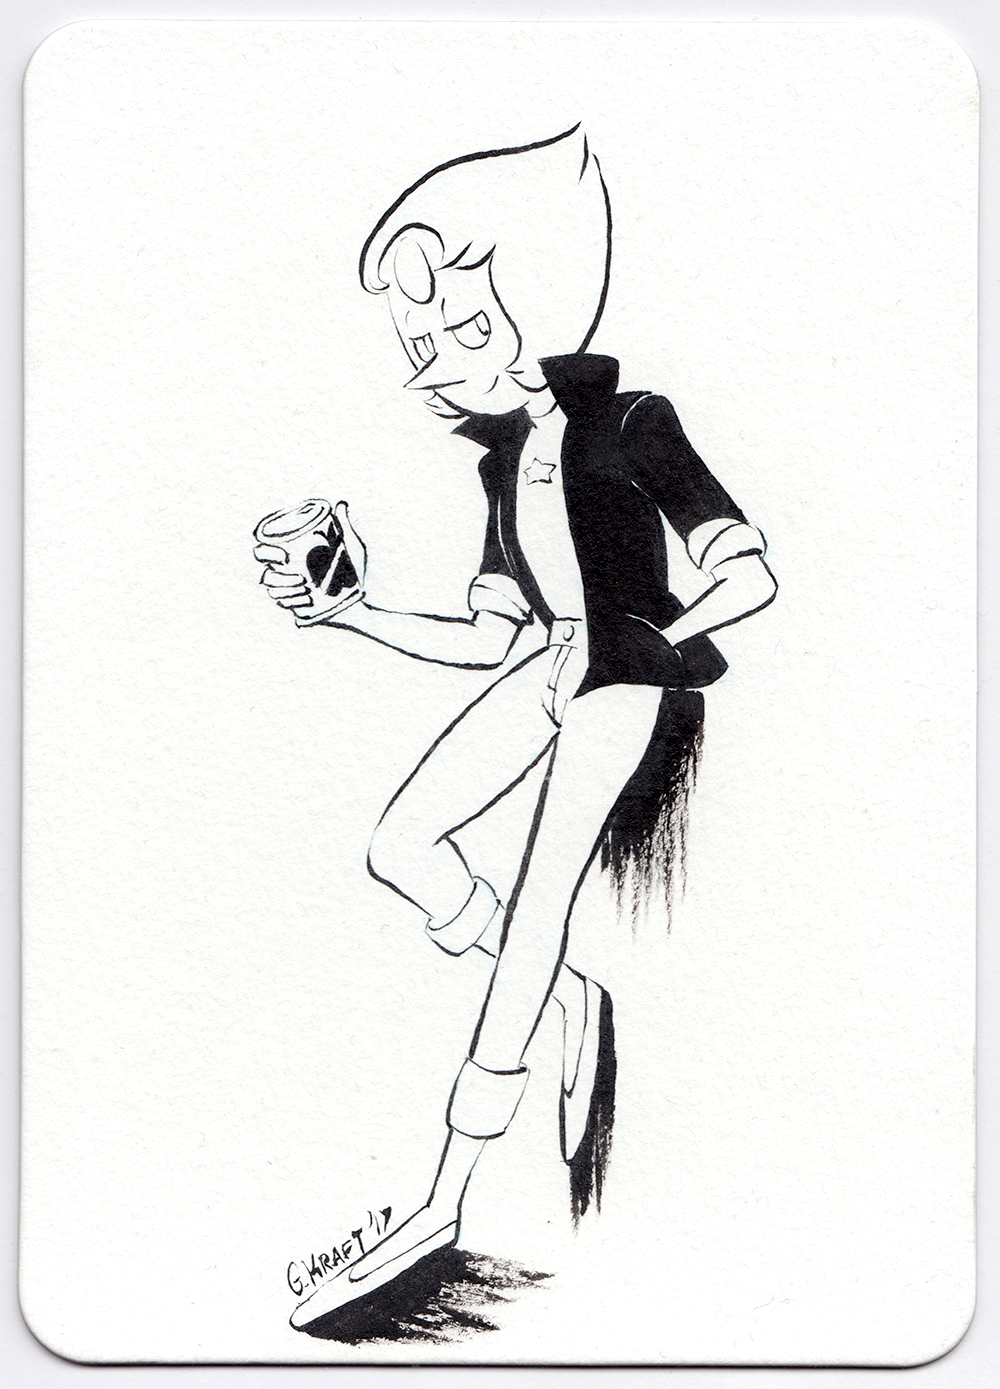 Bad Pearl for a brush pen commission.